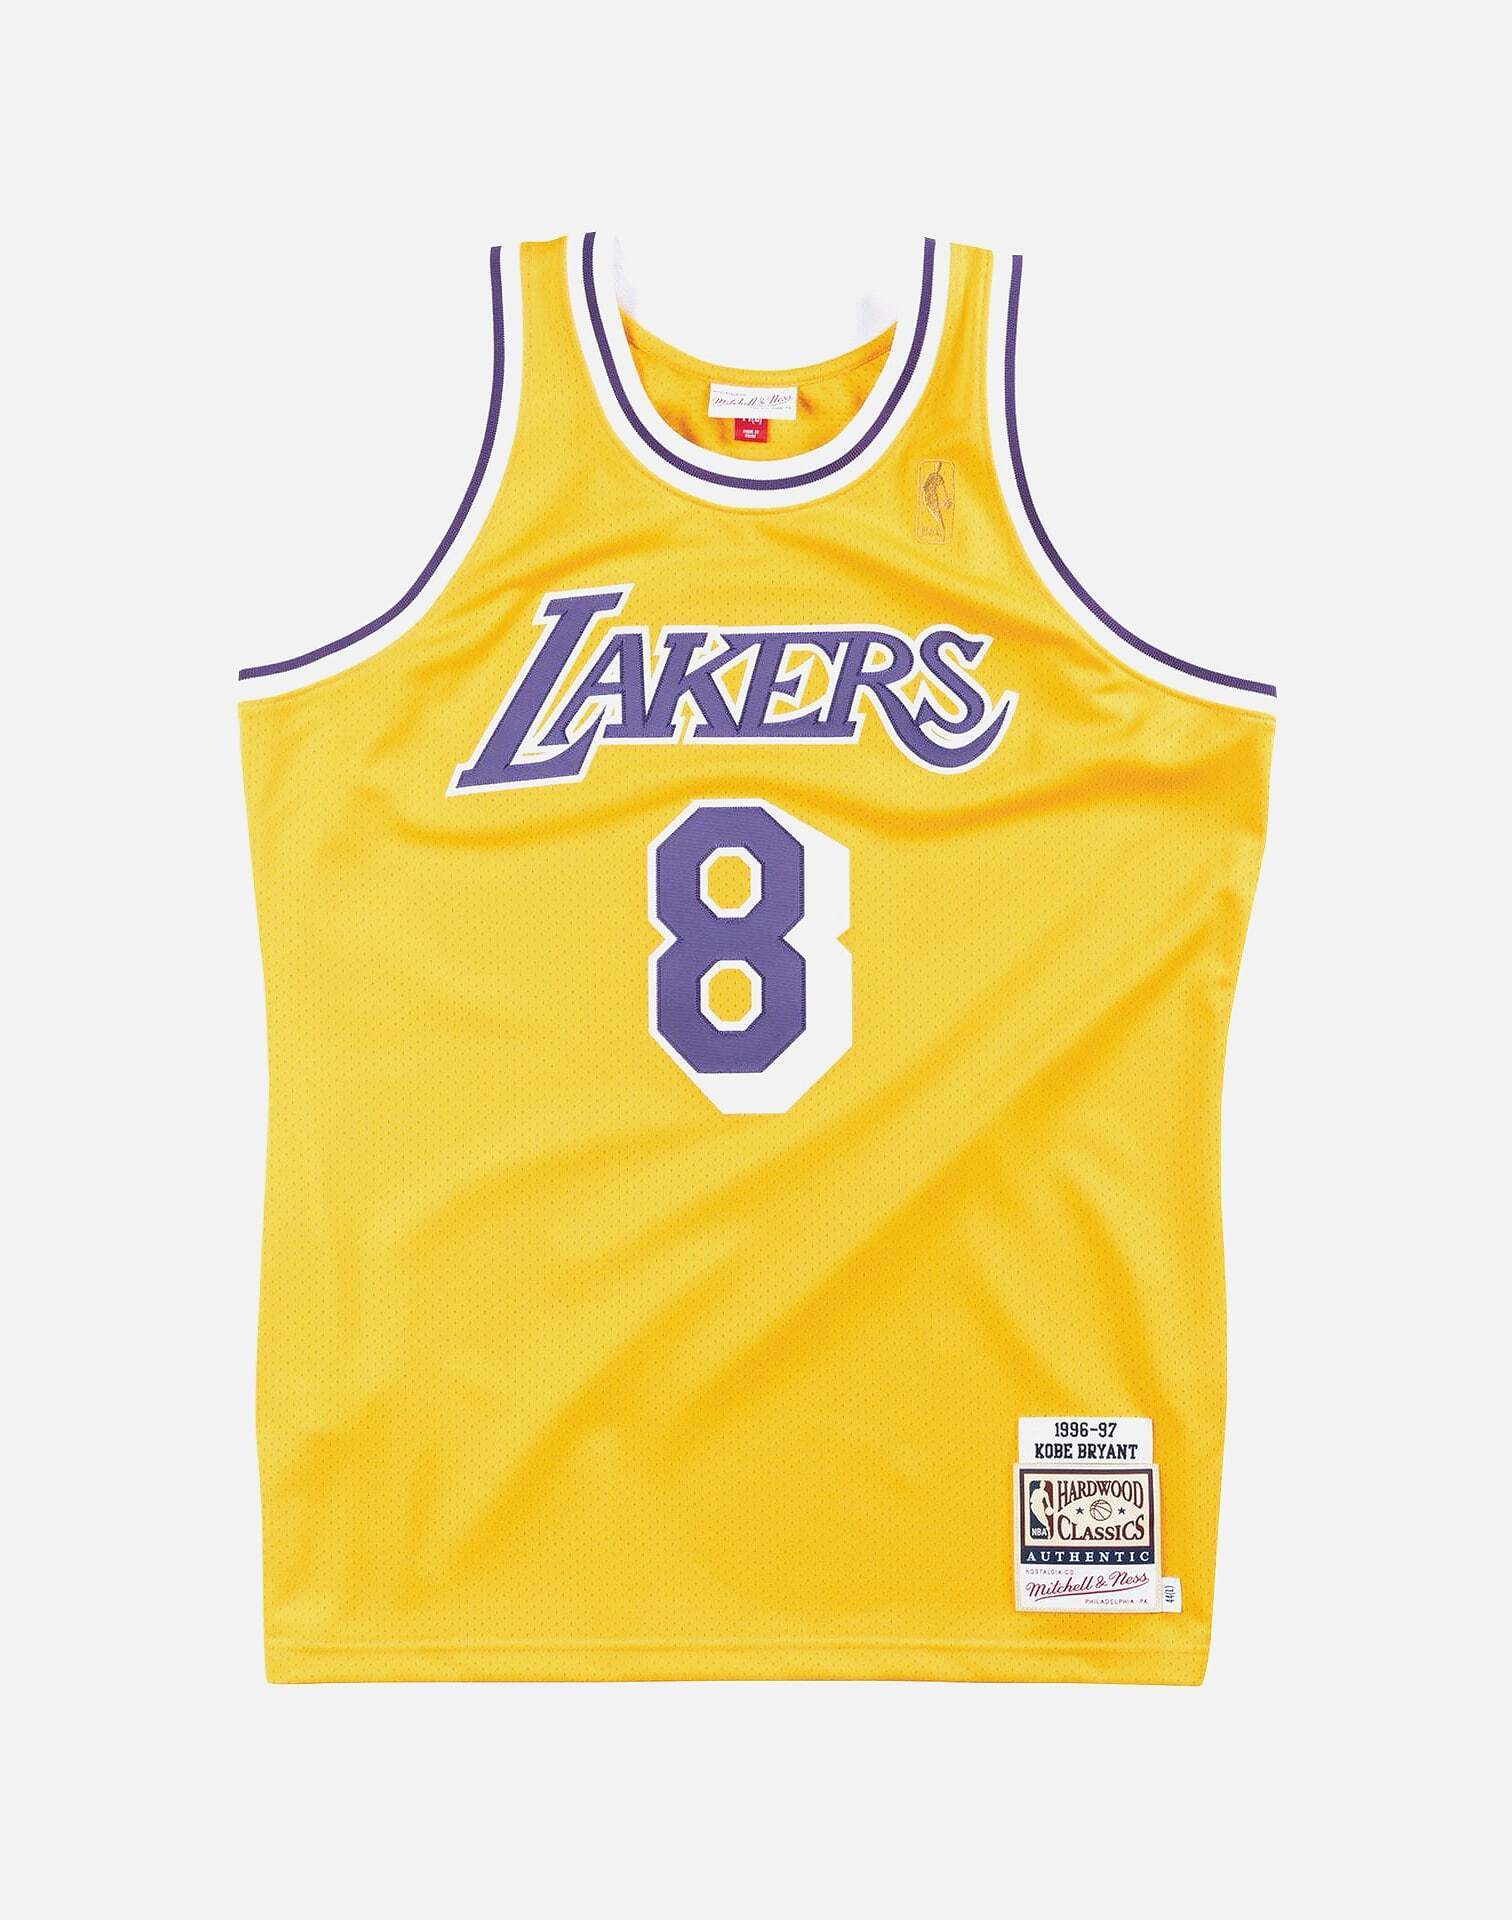 Lakers Kobe 8 Jersey Size L (youth) for Sale in Downey, CA - OfferUp